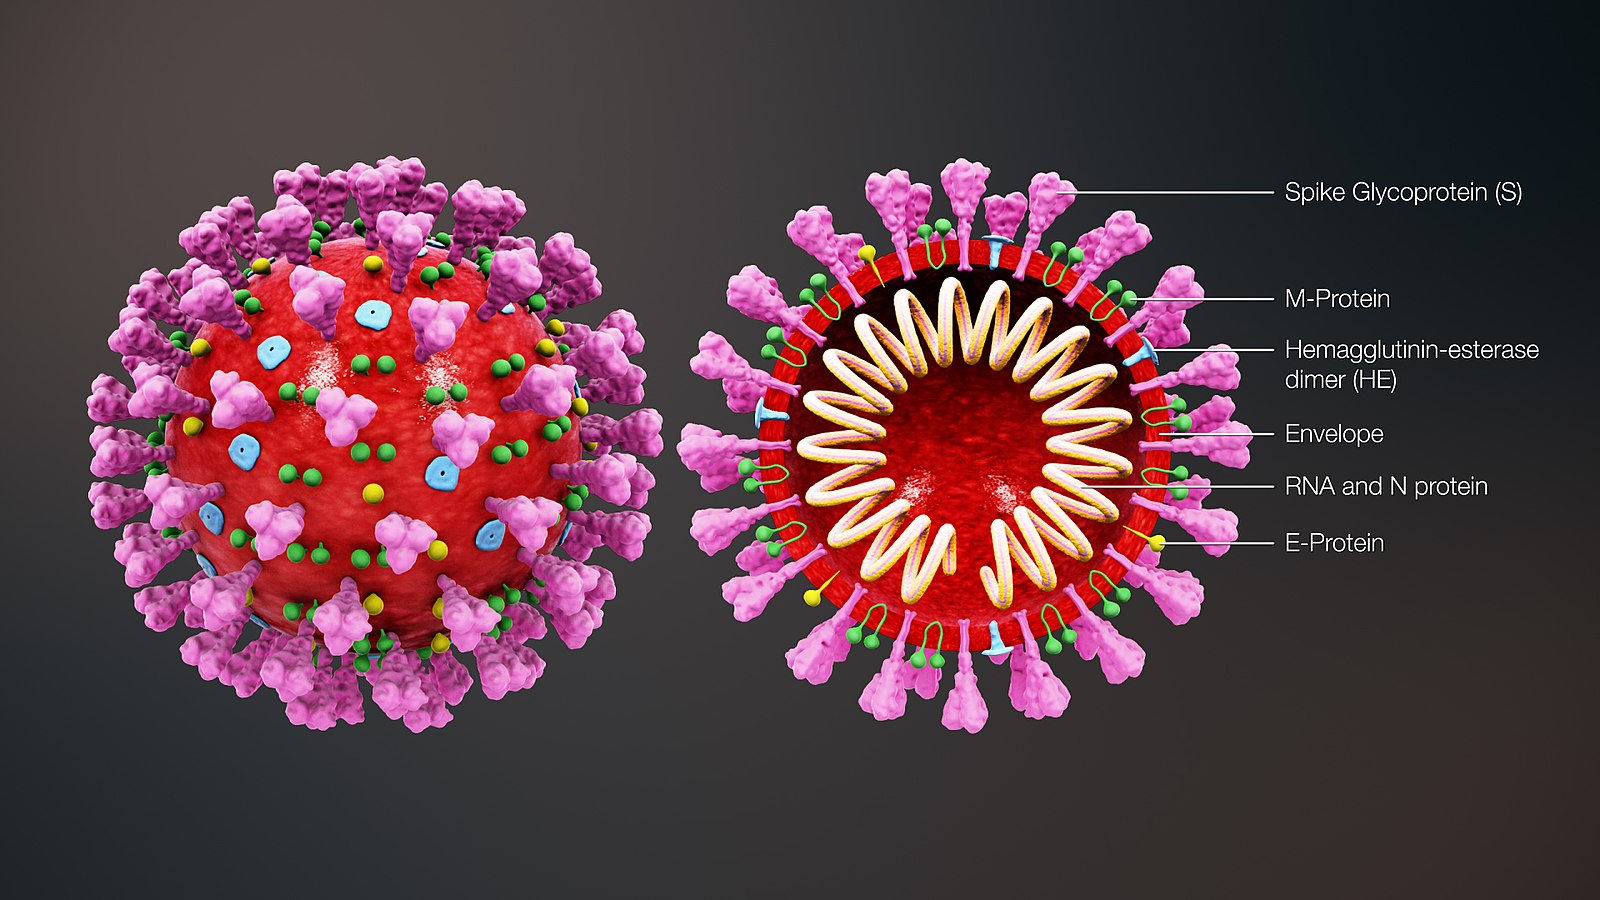 Difference Between Covid-19 and Coronavirus